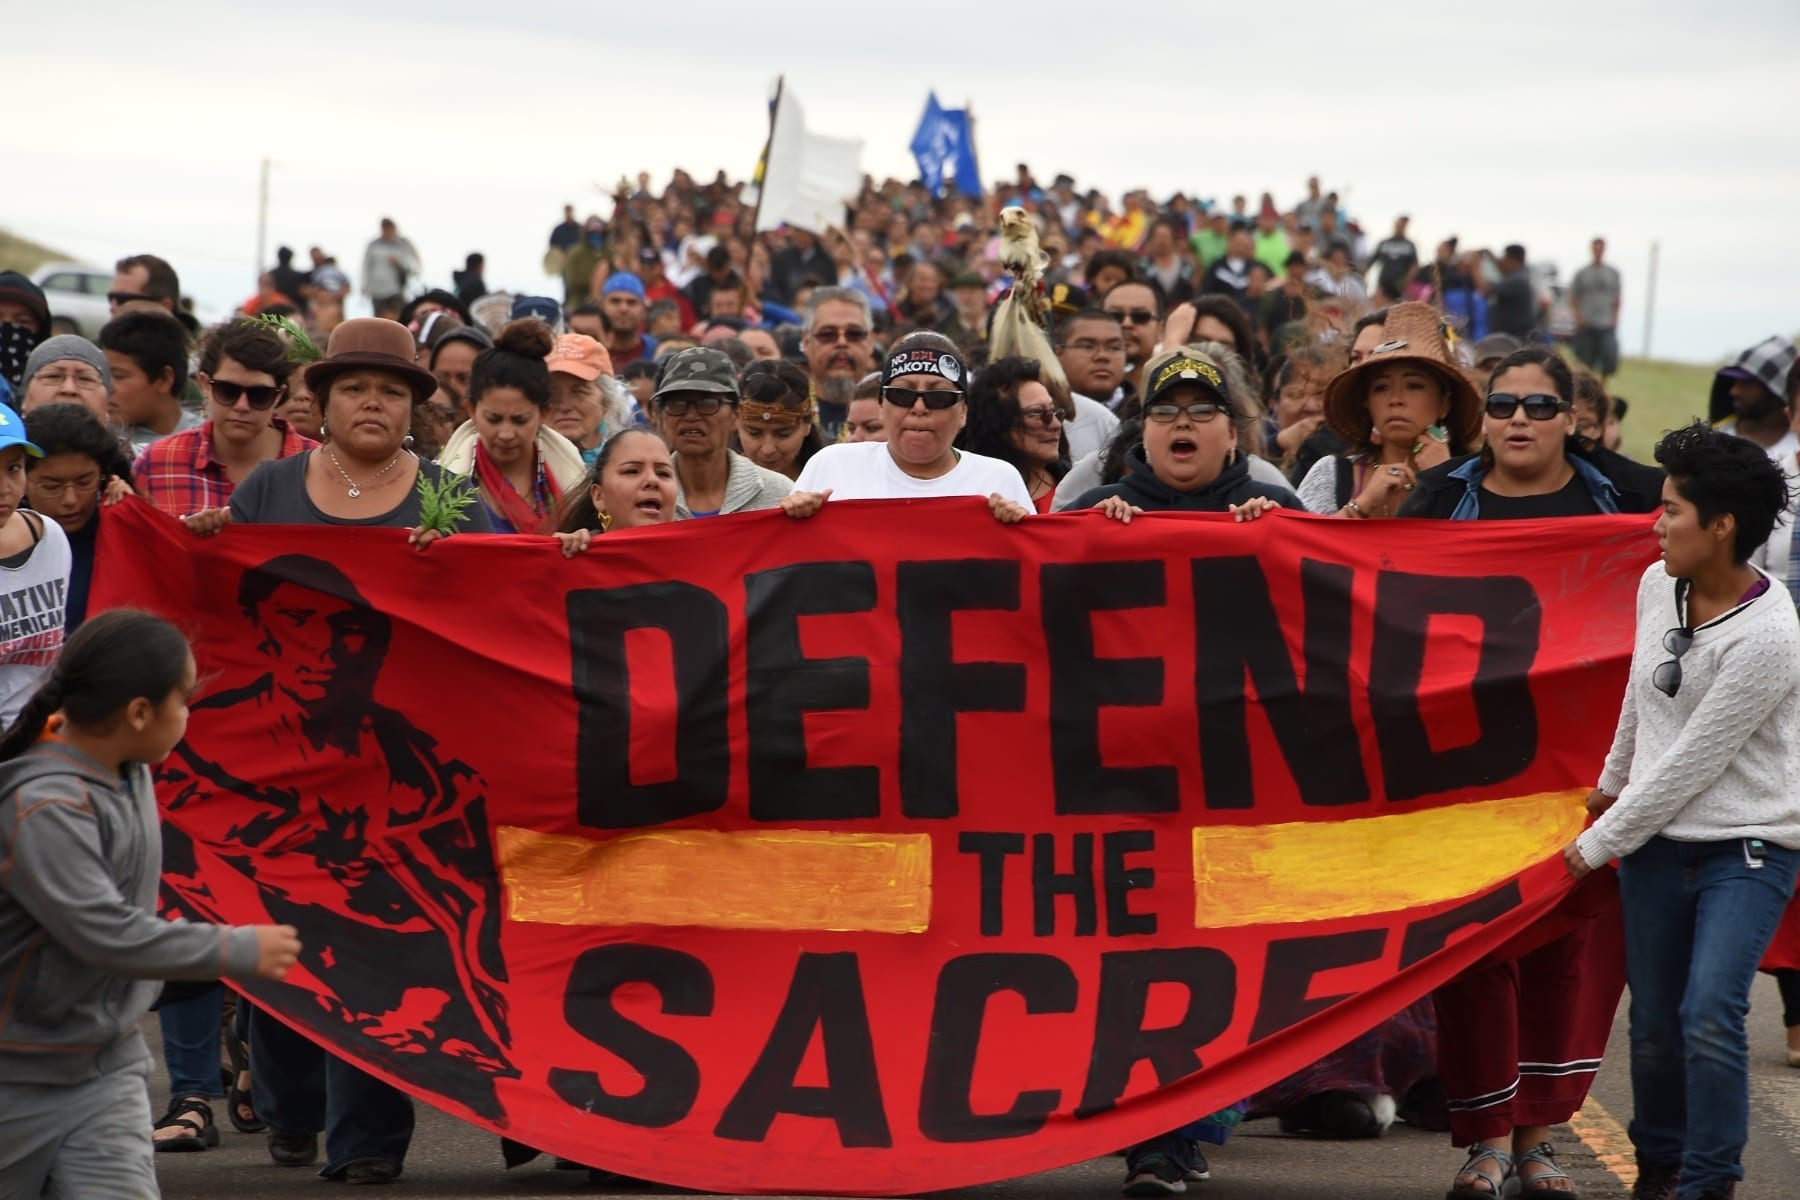 A group of Native American protesters marching with a sign that says "Defend the Sacred."